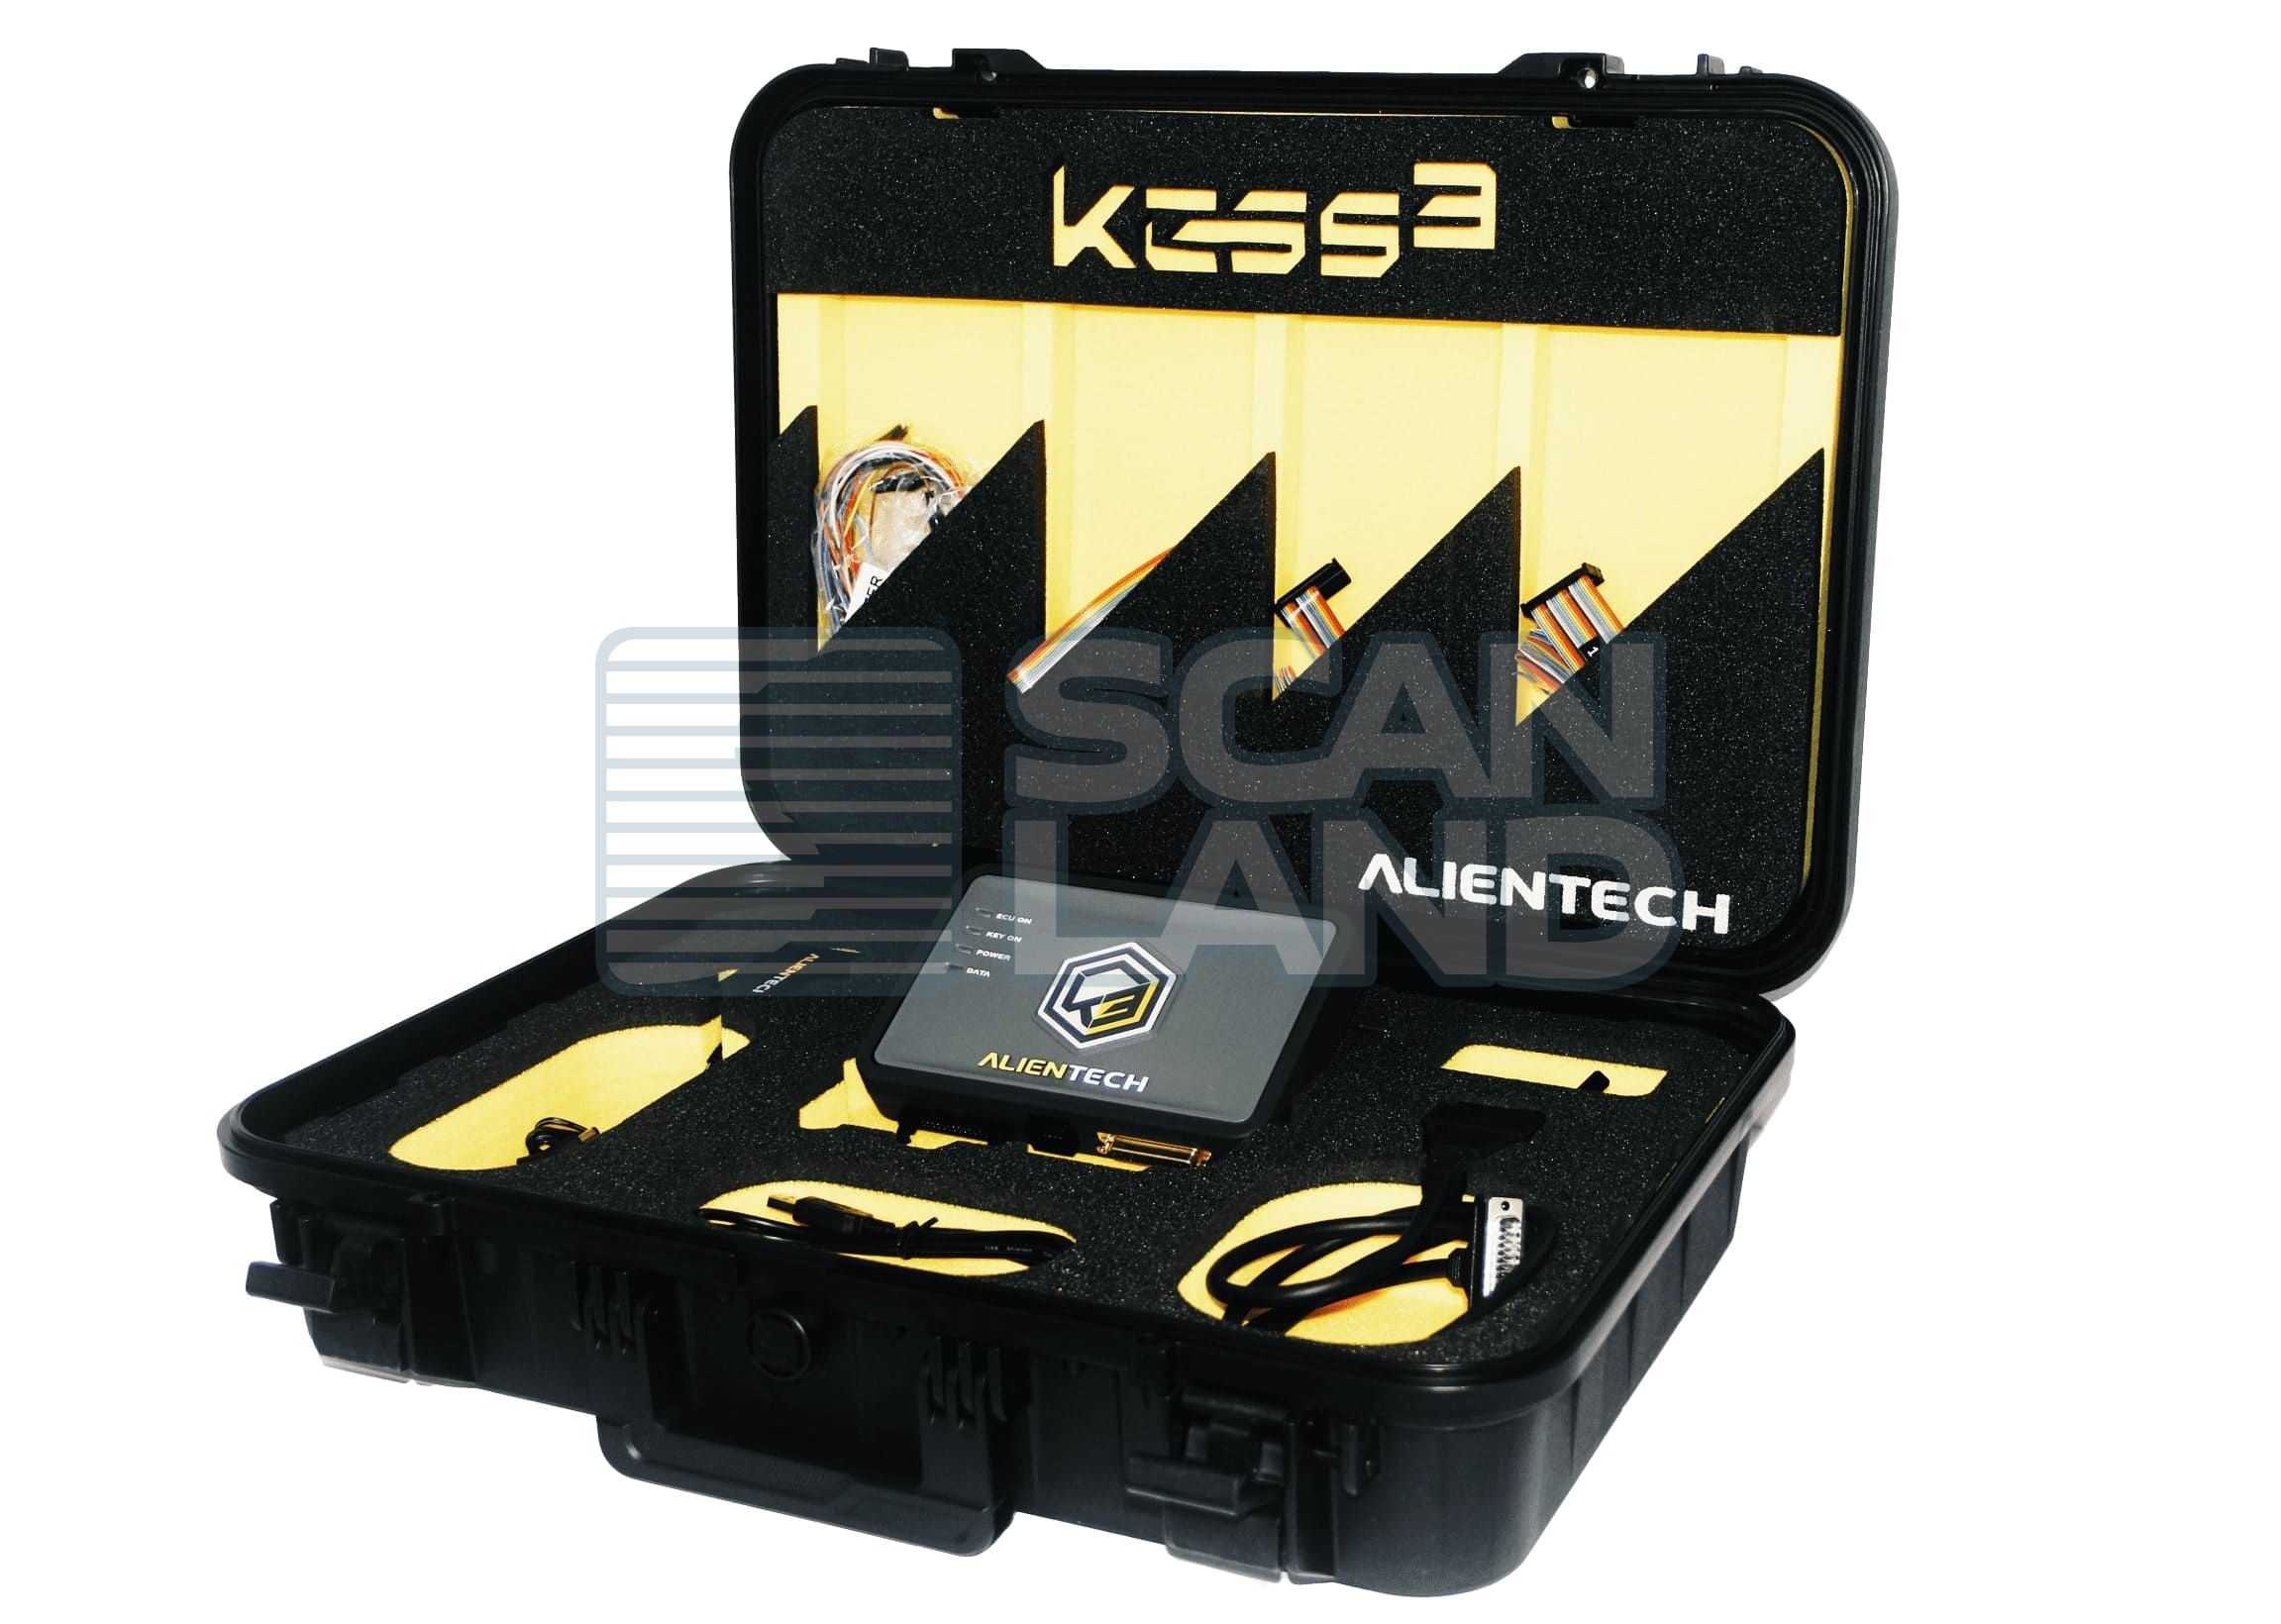 Alientech KESS3 Slave Agriculture - Truck & Buses Bench-Boot